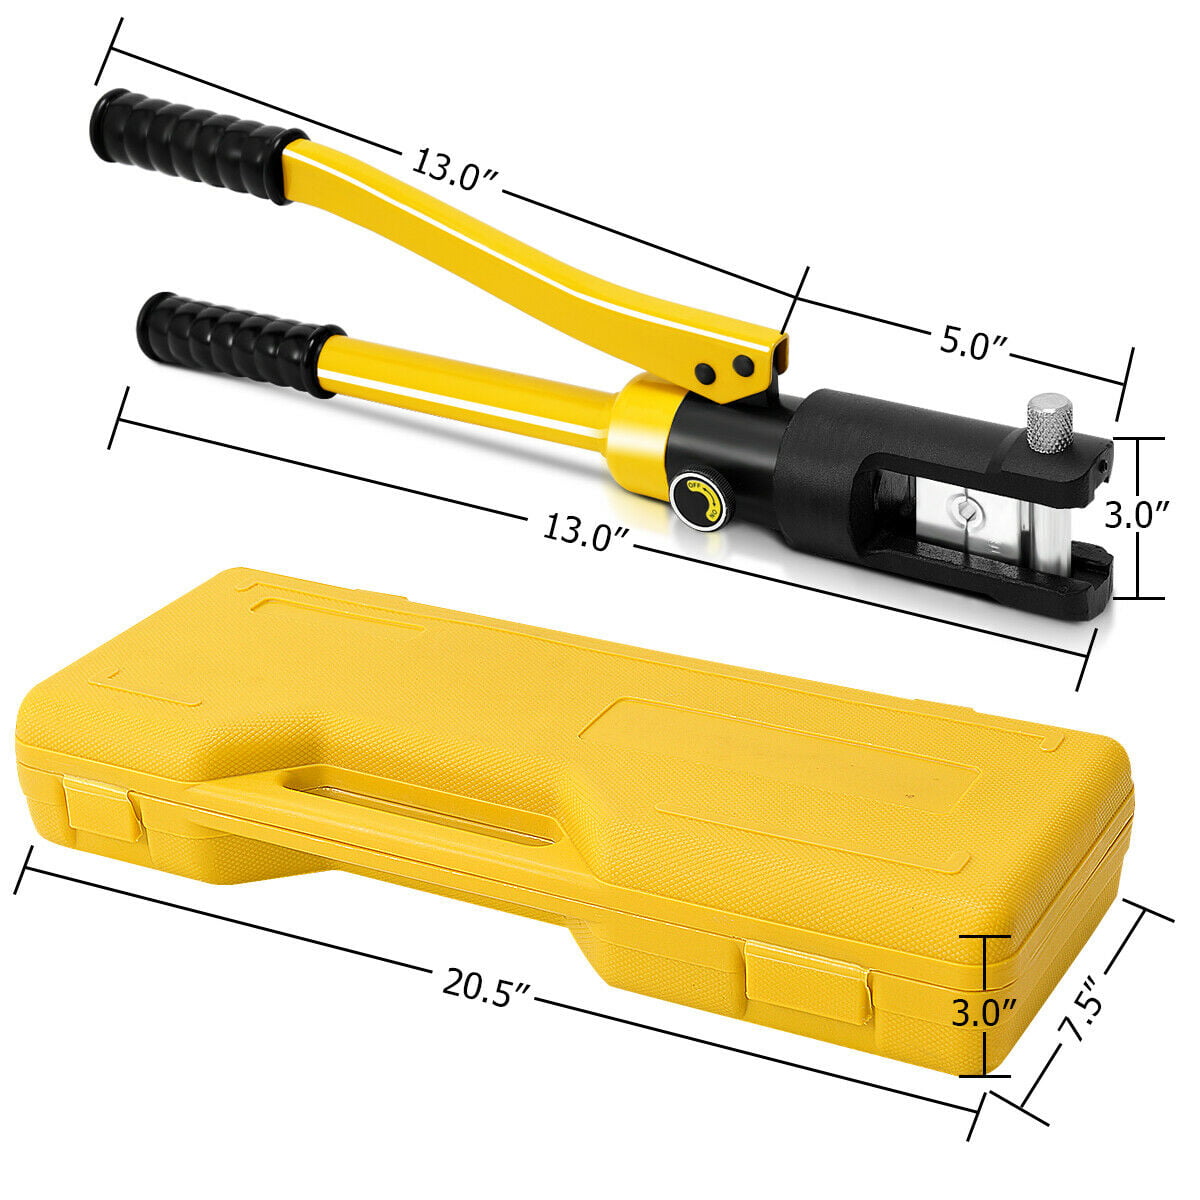 16 Ton Cable Crimping Tool with 11 Crimper Dies ABNHydraulic Crimper 